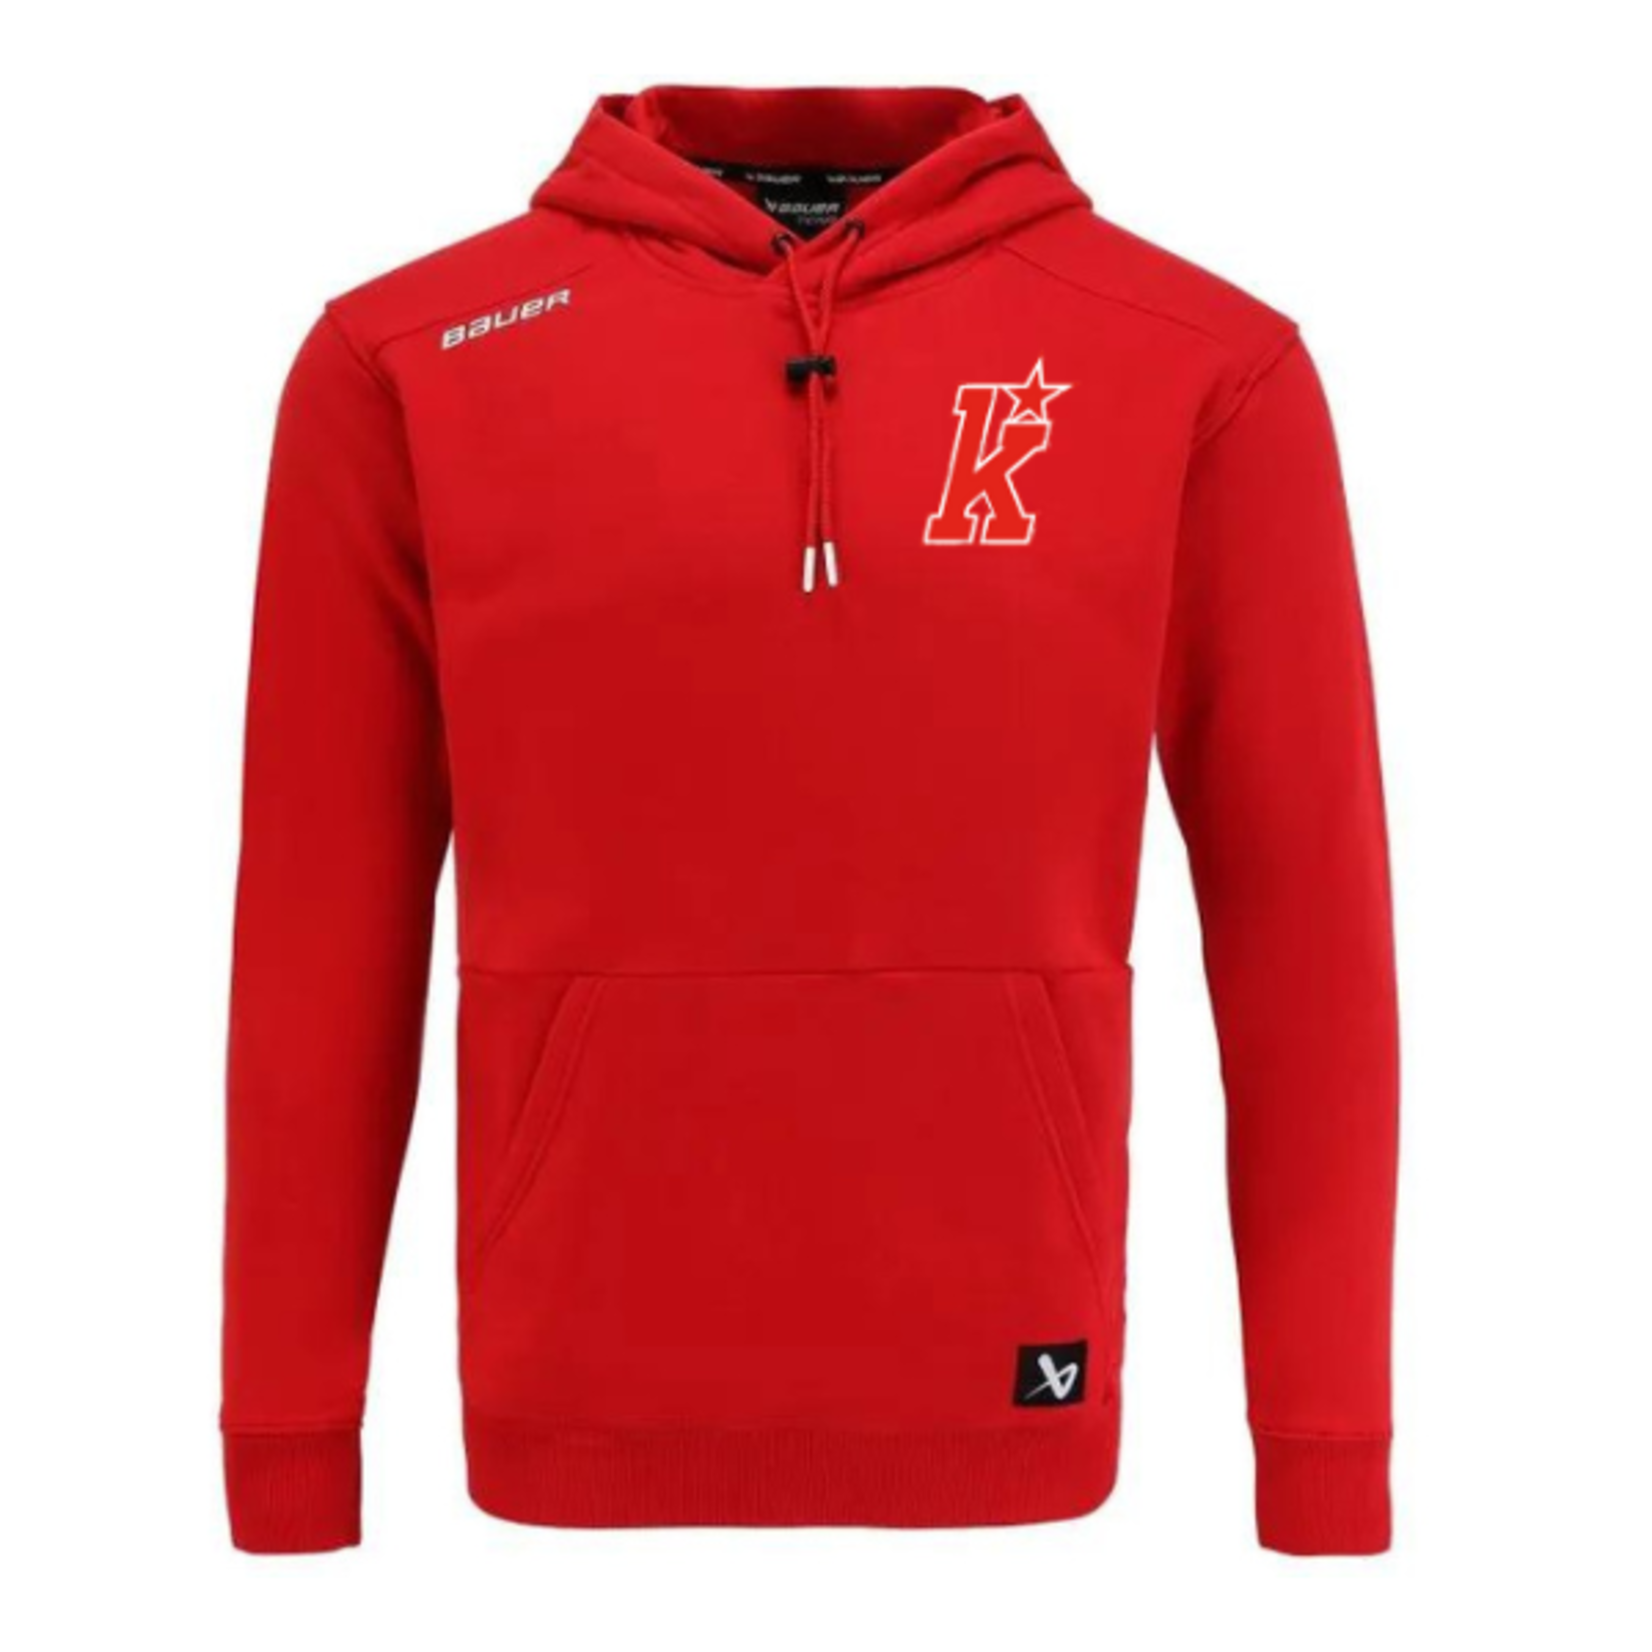 Bauer Kirkwood Bauer Ultimate Hoodie (YOUTH) RED